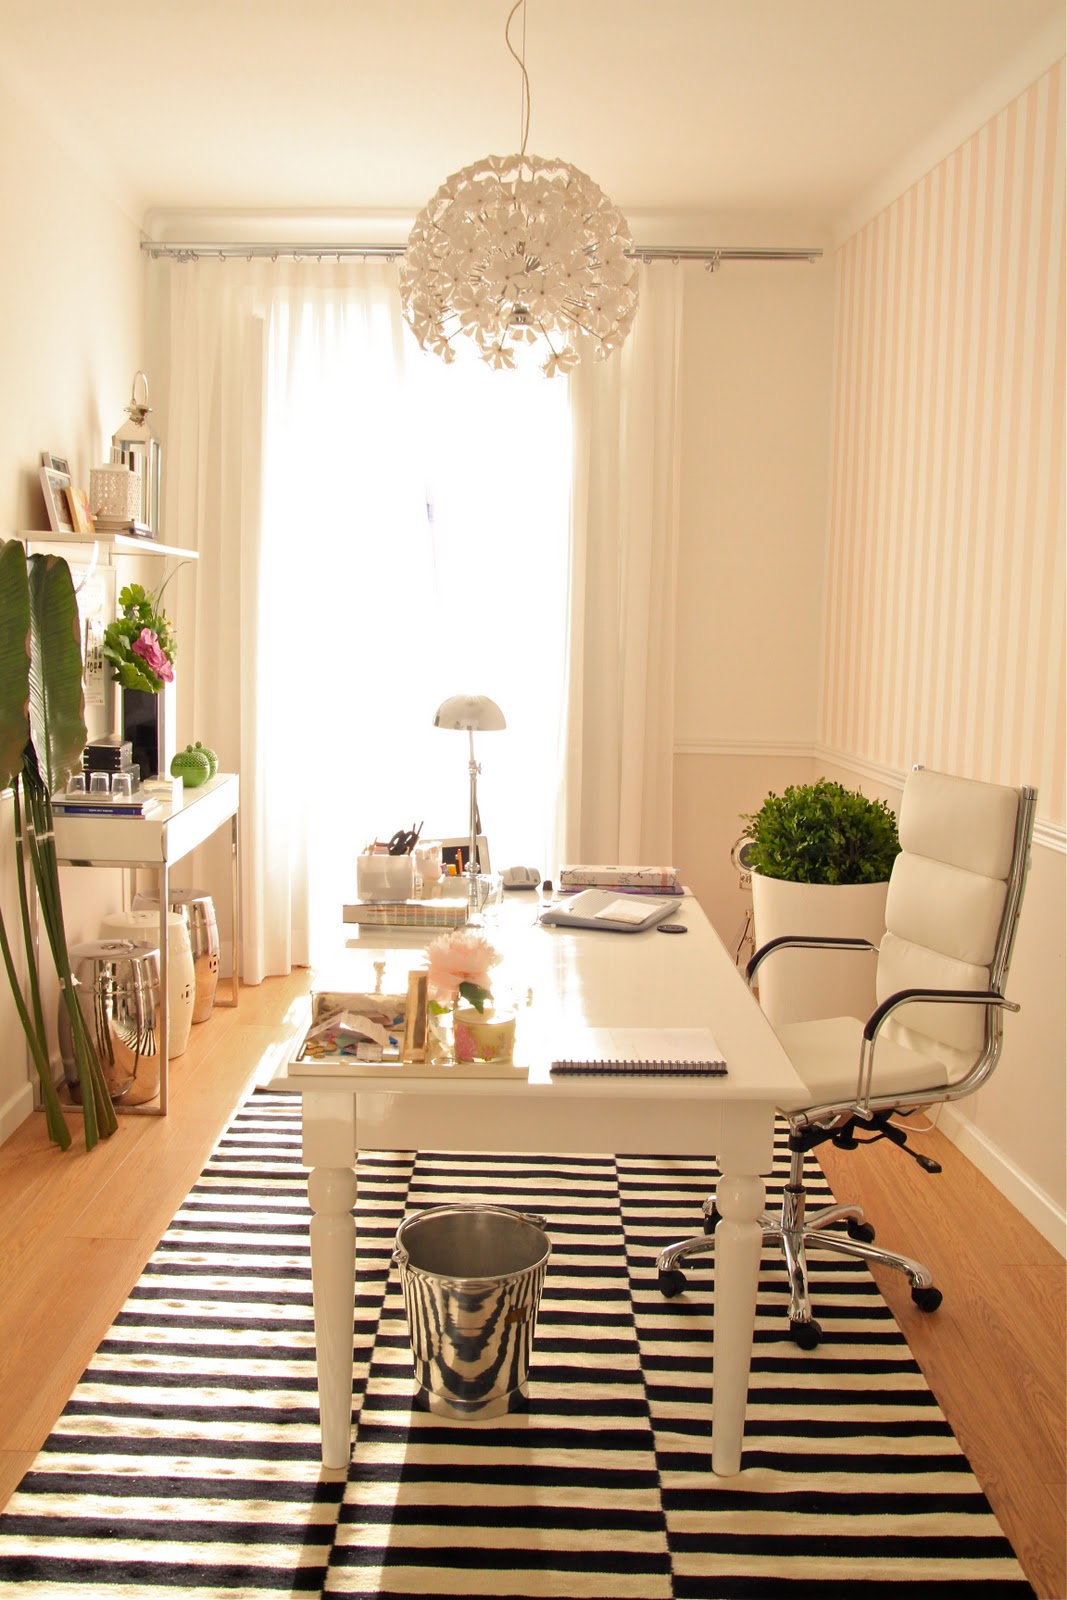 Beau Lifestyle: Rendez-vous with decorator Ana Antunes ...